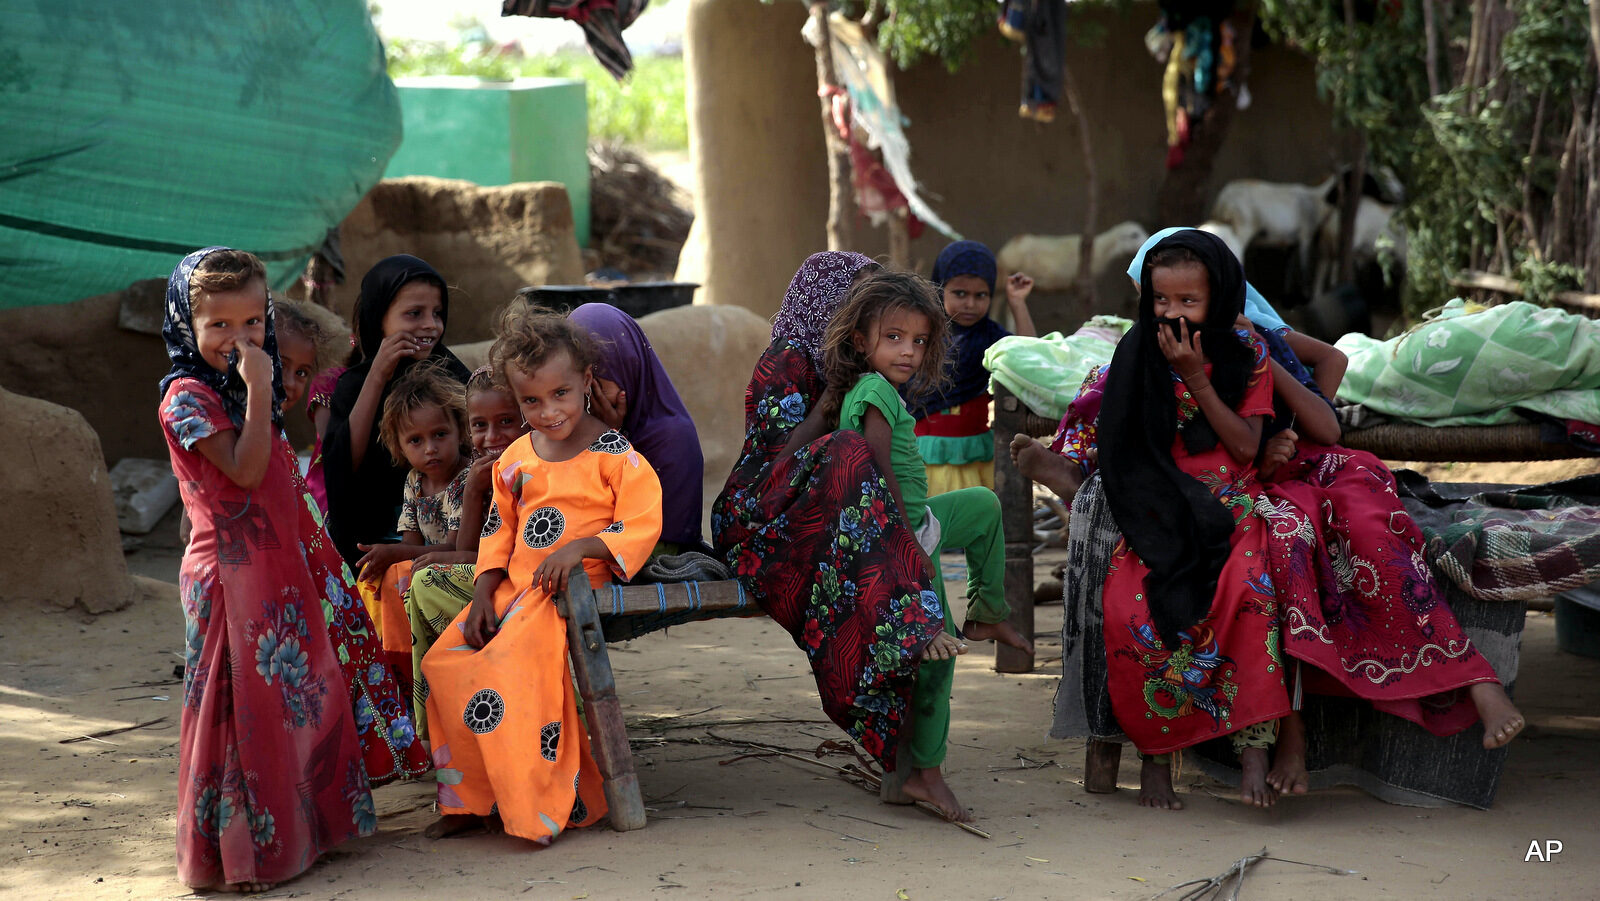 In this photo taken on Friday, Oct. 7, 2016, girls gather at a camp for internally displaced people near the town of Abs, located on Yemen’s western coastal plain below towering desert mountains. Hundreds of Yemenis fleeing war are now living in tents and mud-brick shelters scattered across a cornfield, where they buried the remains of loved ones they carried with them when they escaped.